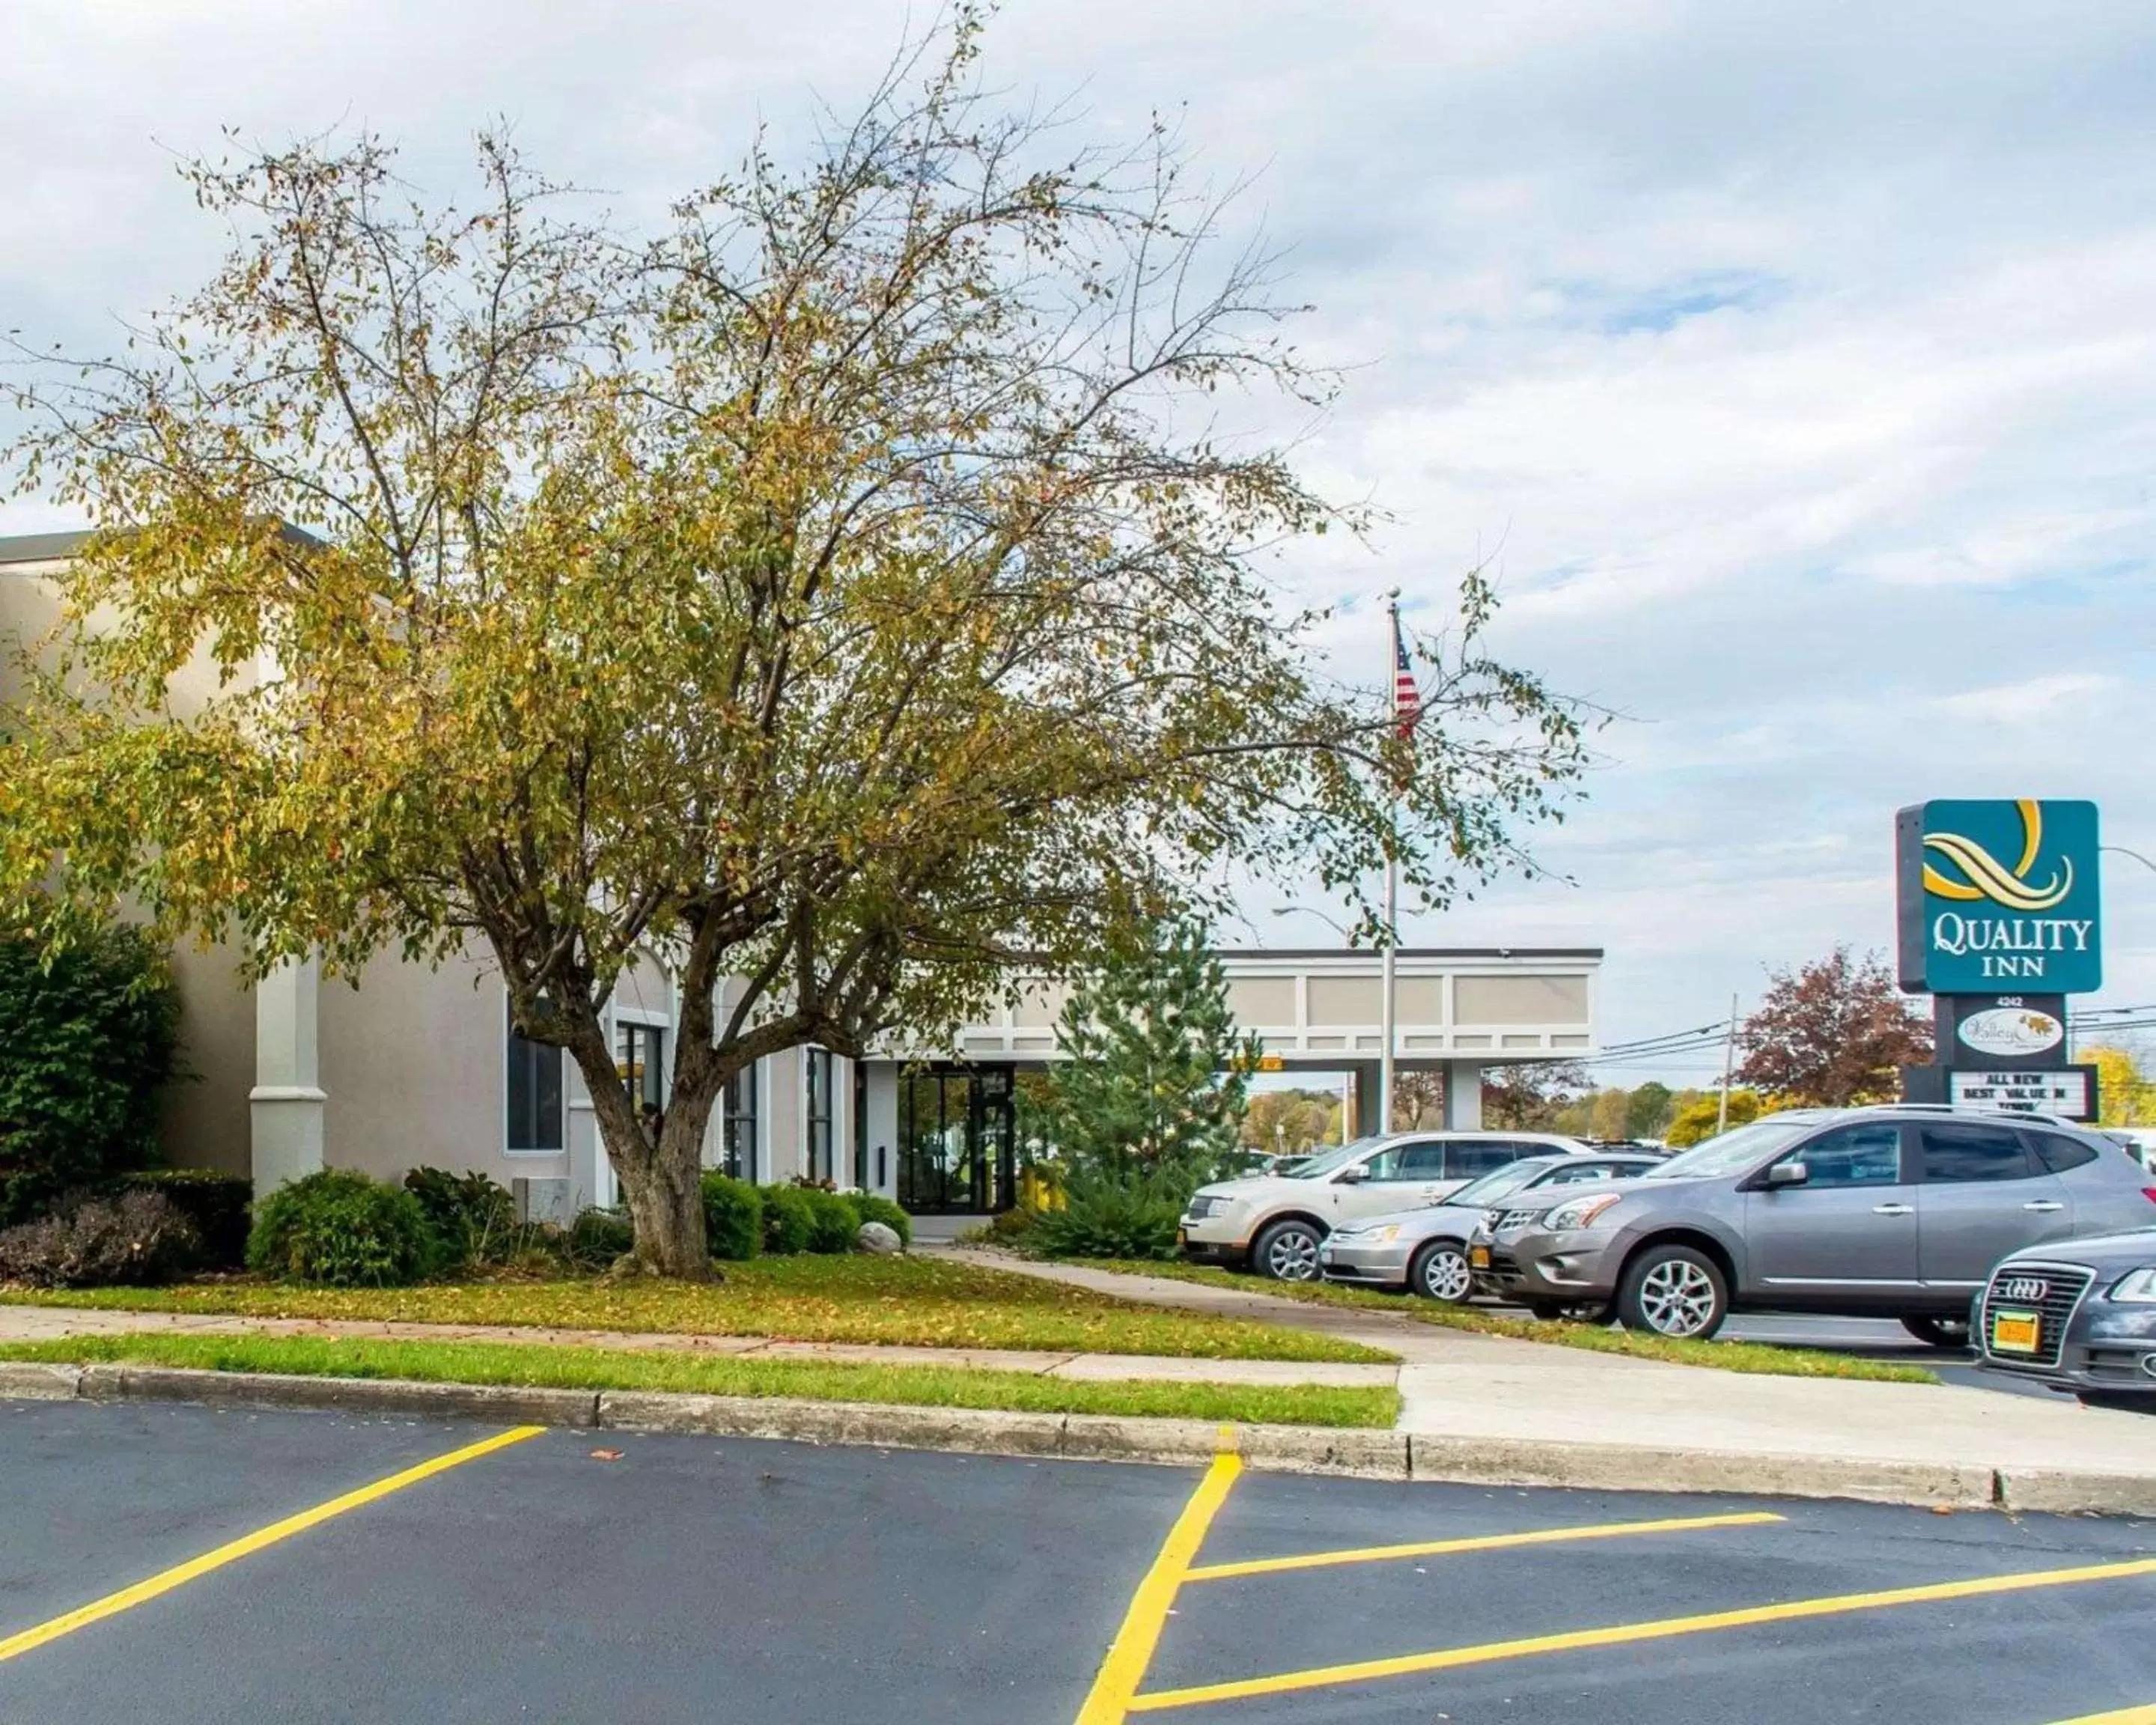 Property Building in Quality Inn Geneseo